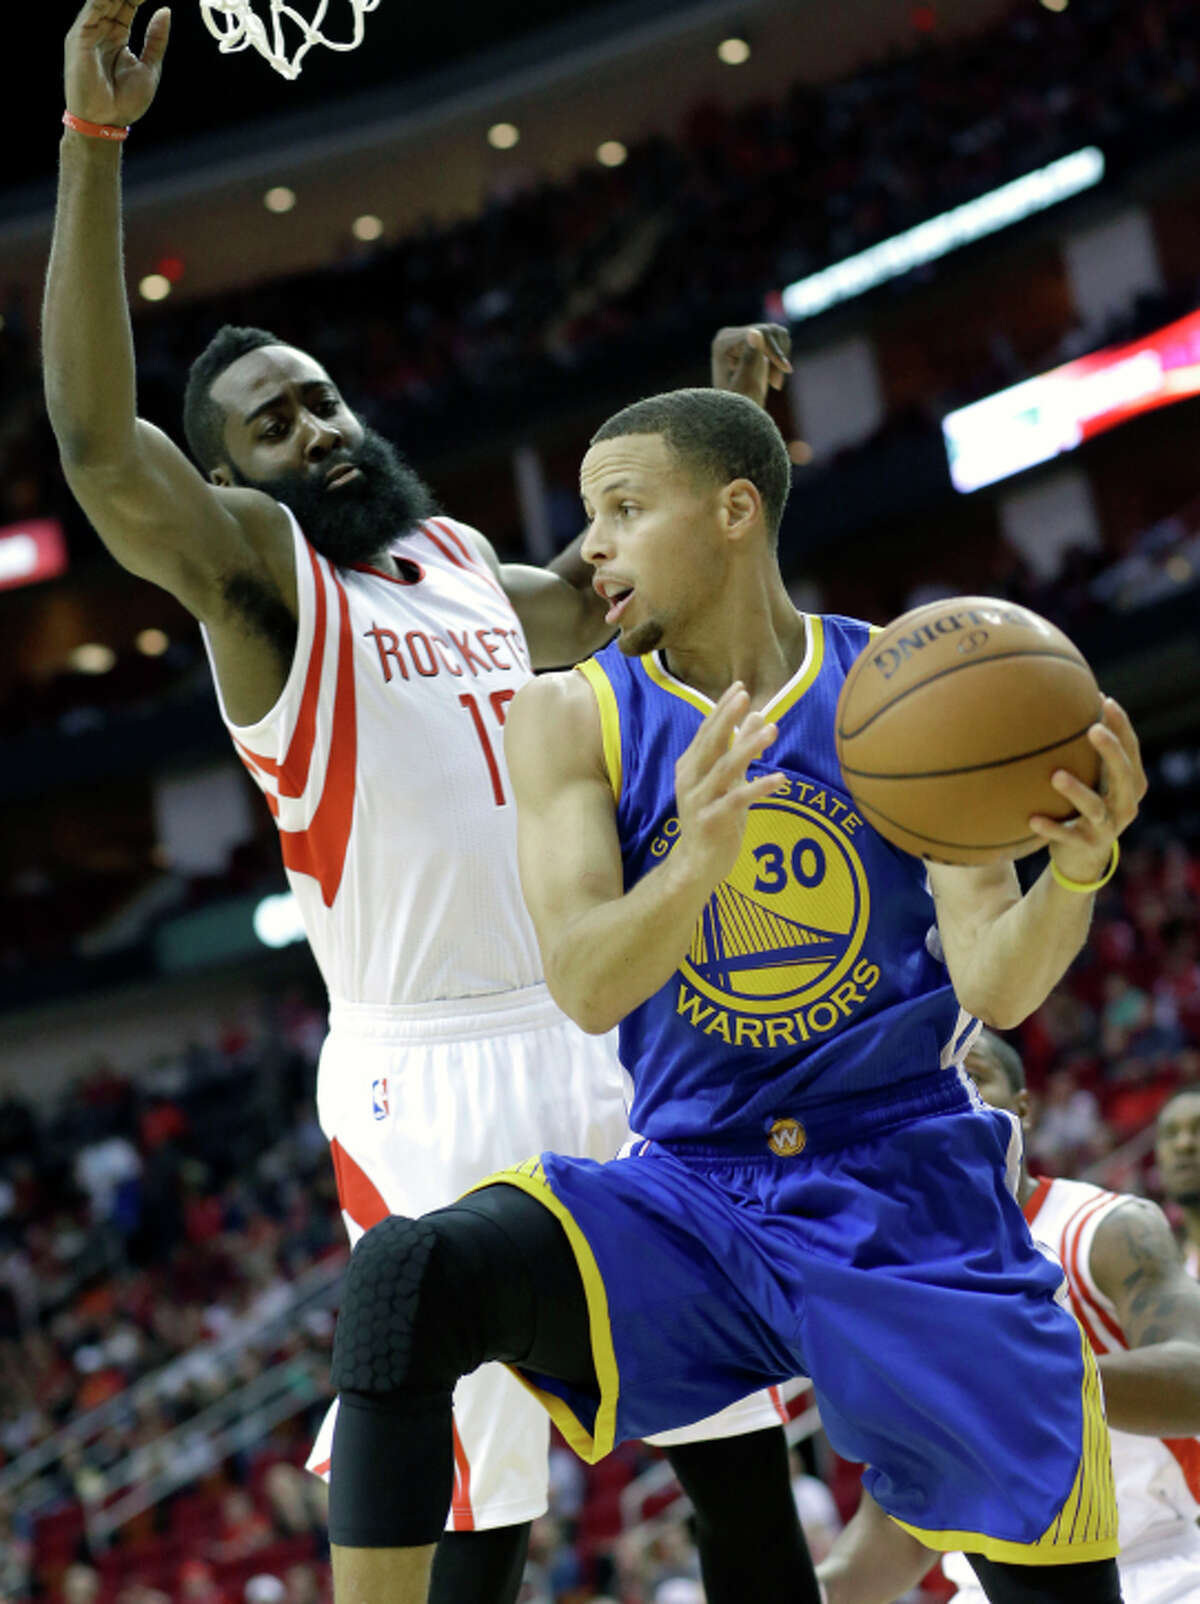 Stephen Curry, who had 34 points, is hounded by James Harden.